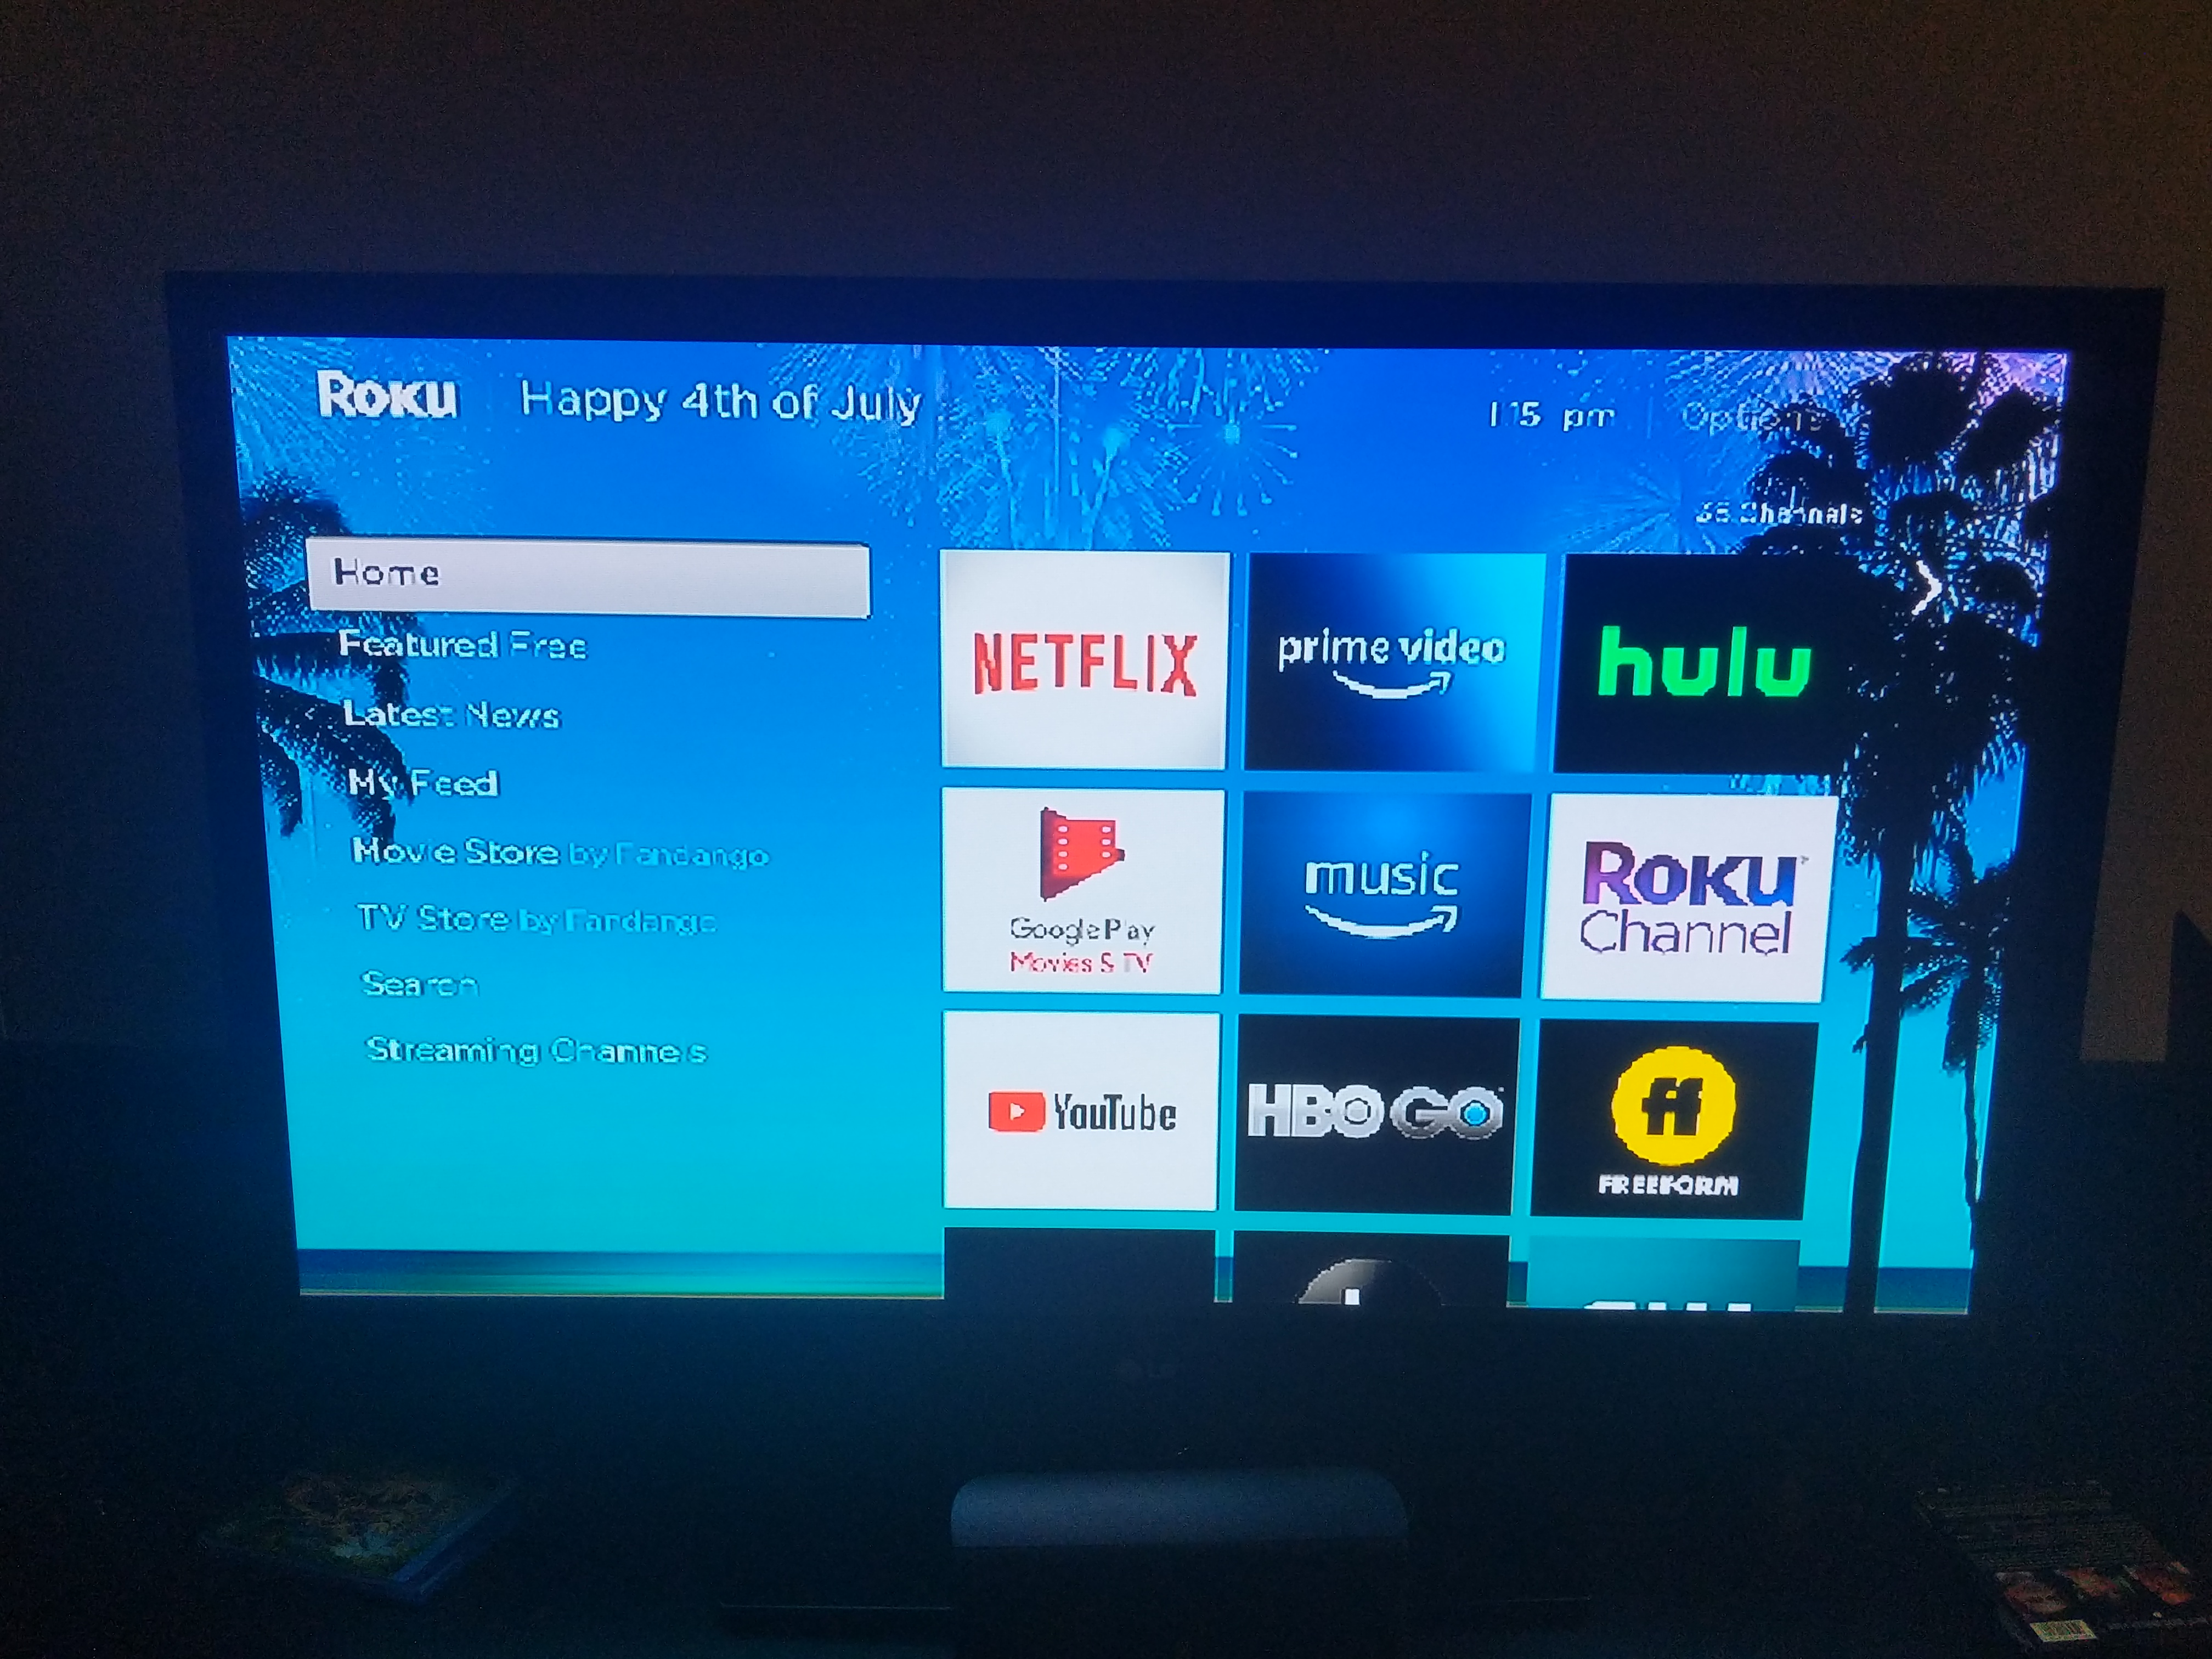 Roku home screen and all channels pixelated - Roku Community